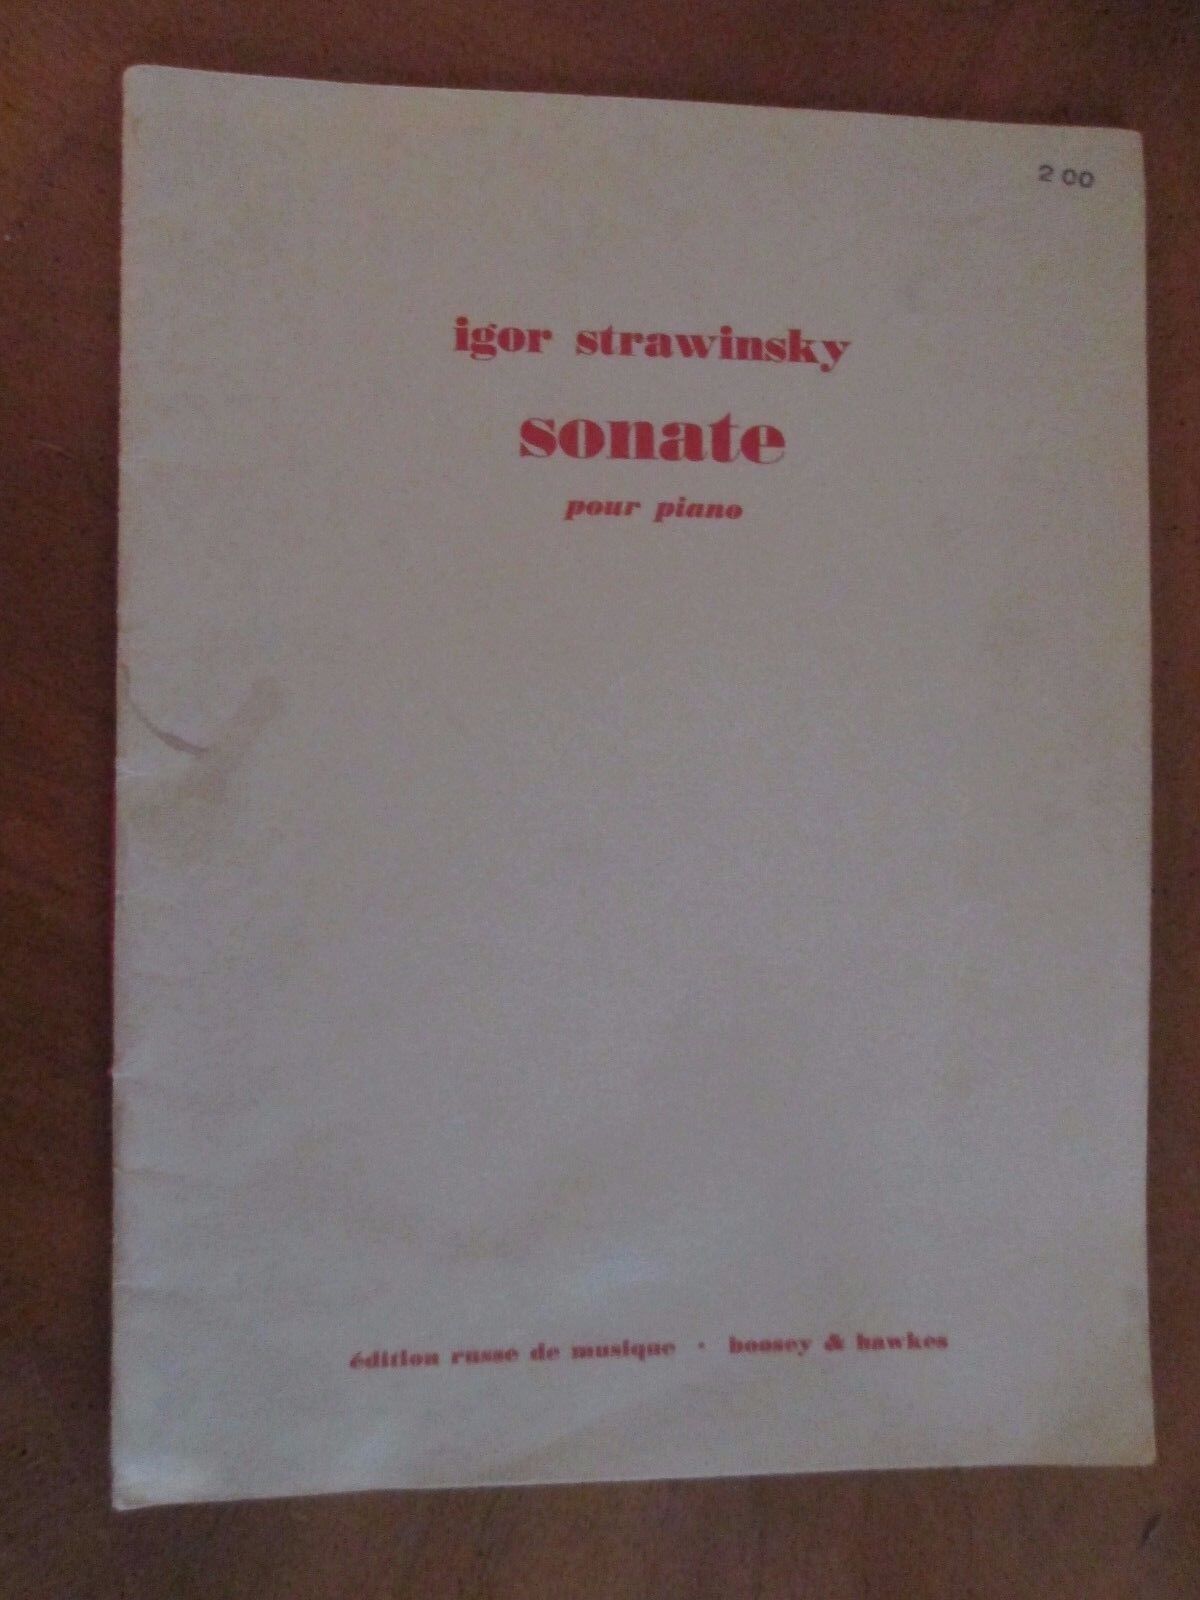 SONATE POUR PIANO  by Igor Stravinsky 1925 Boosey & Hawkes music